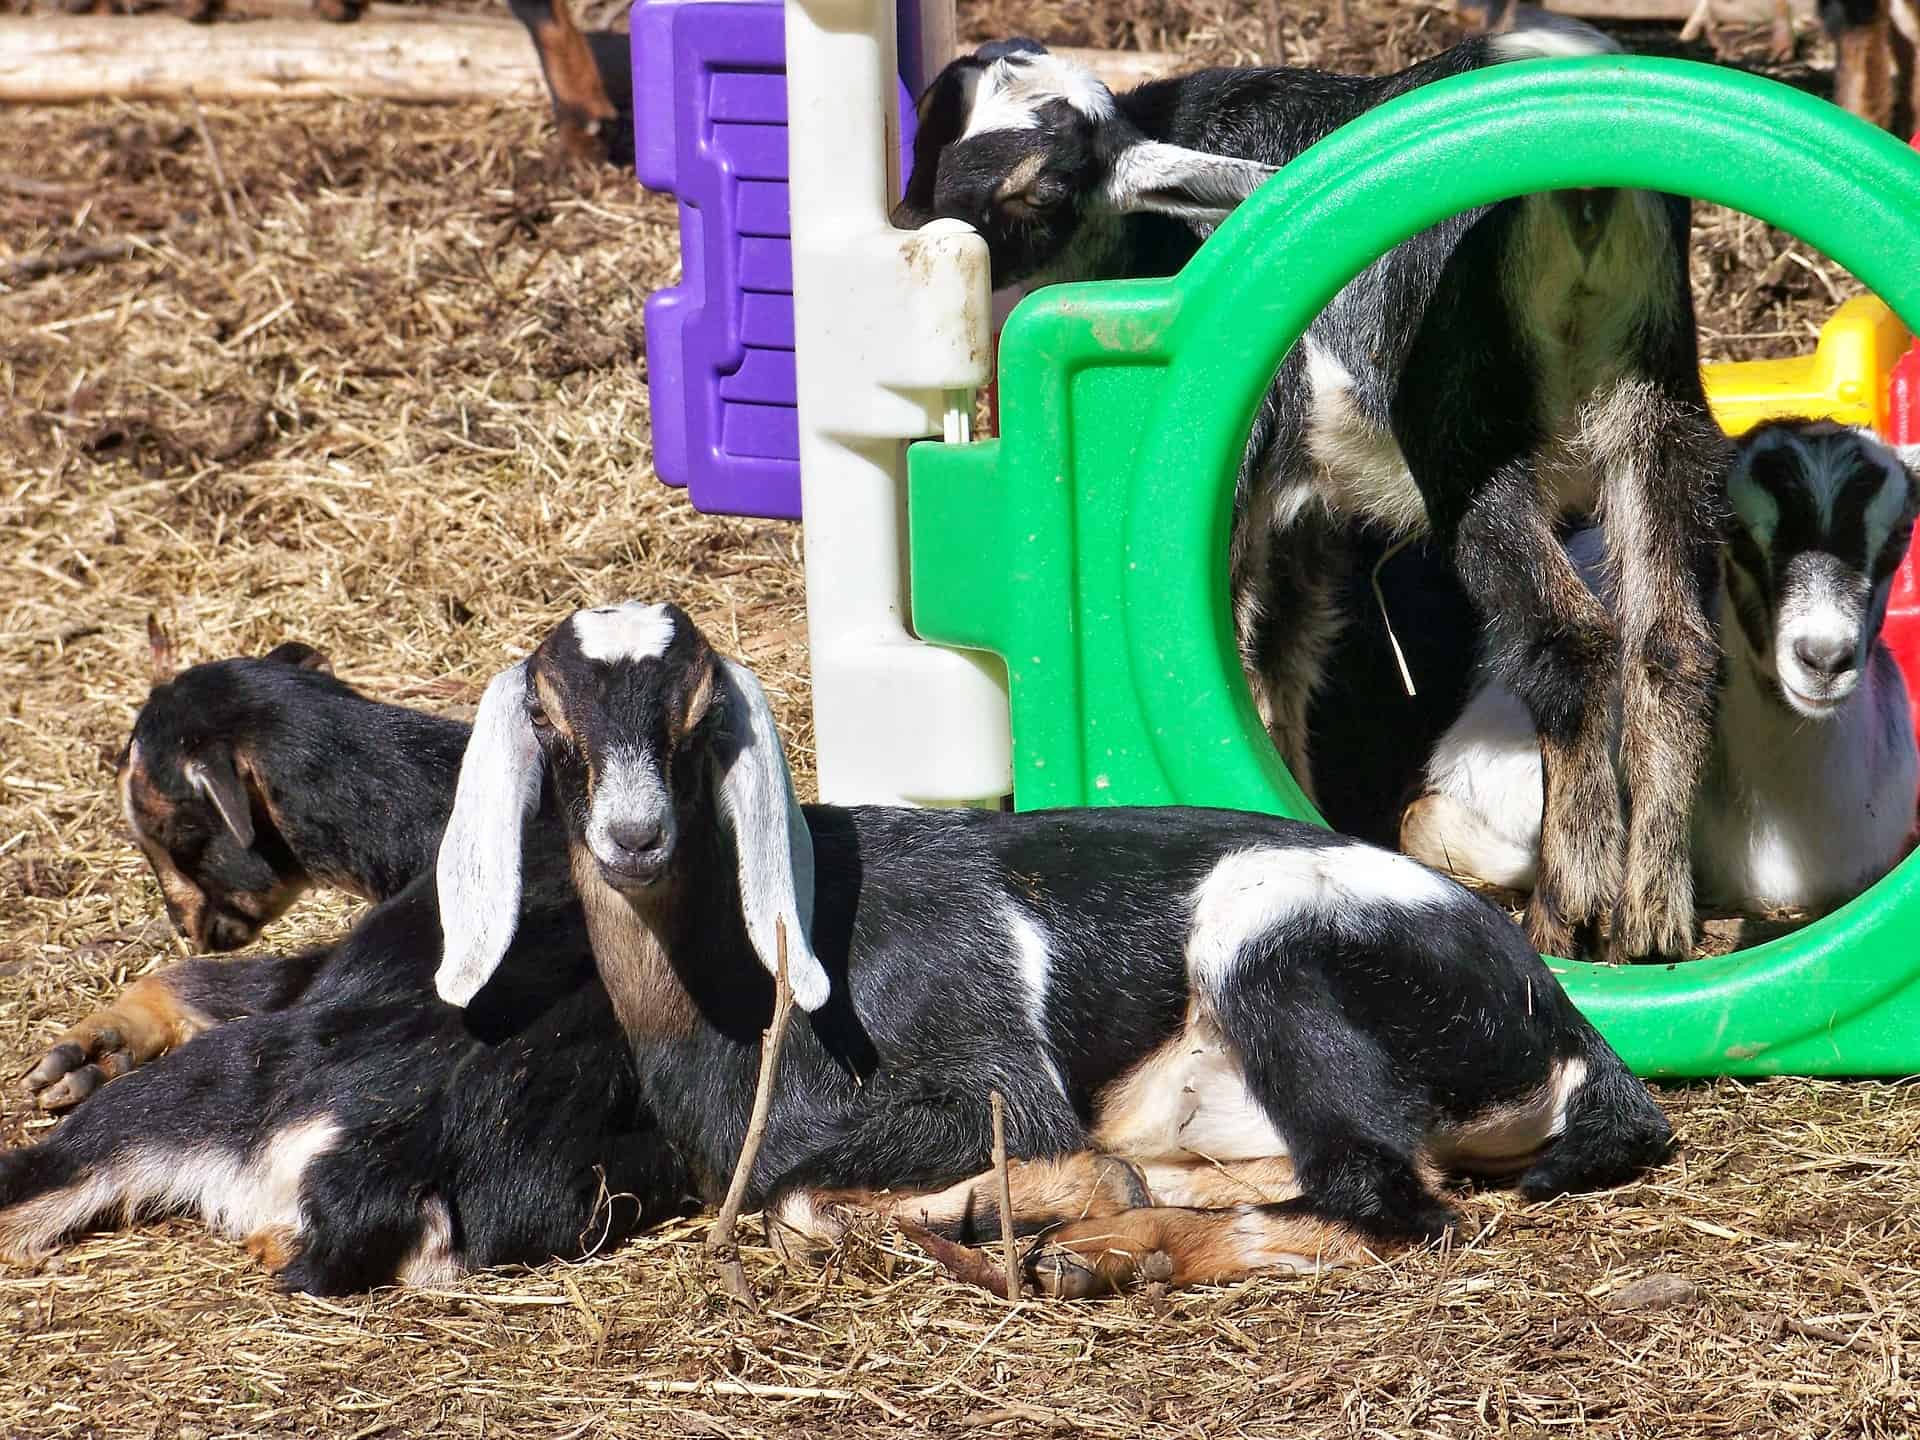 Nubian Goats in a playhouse